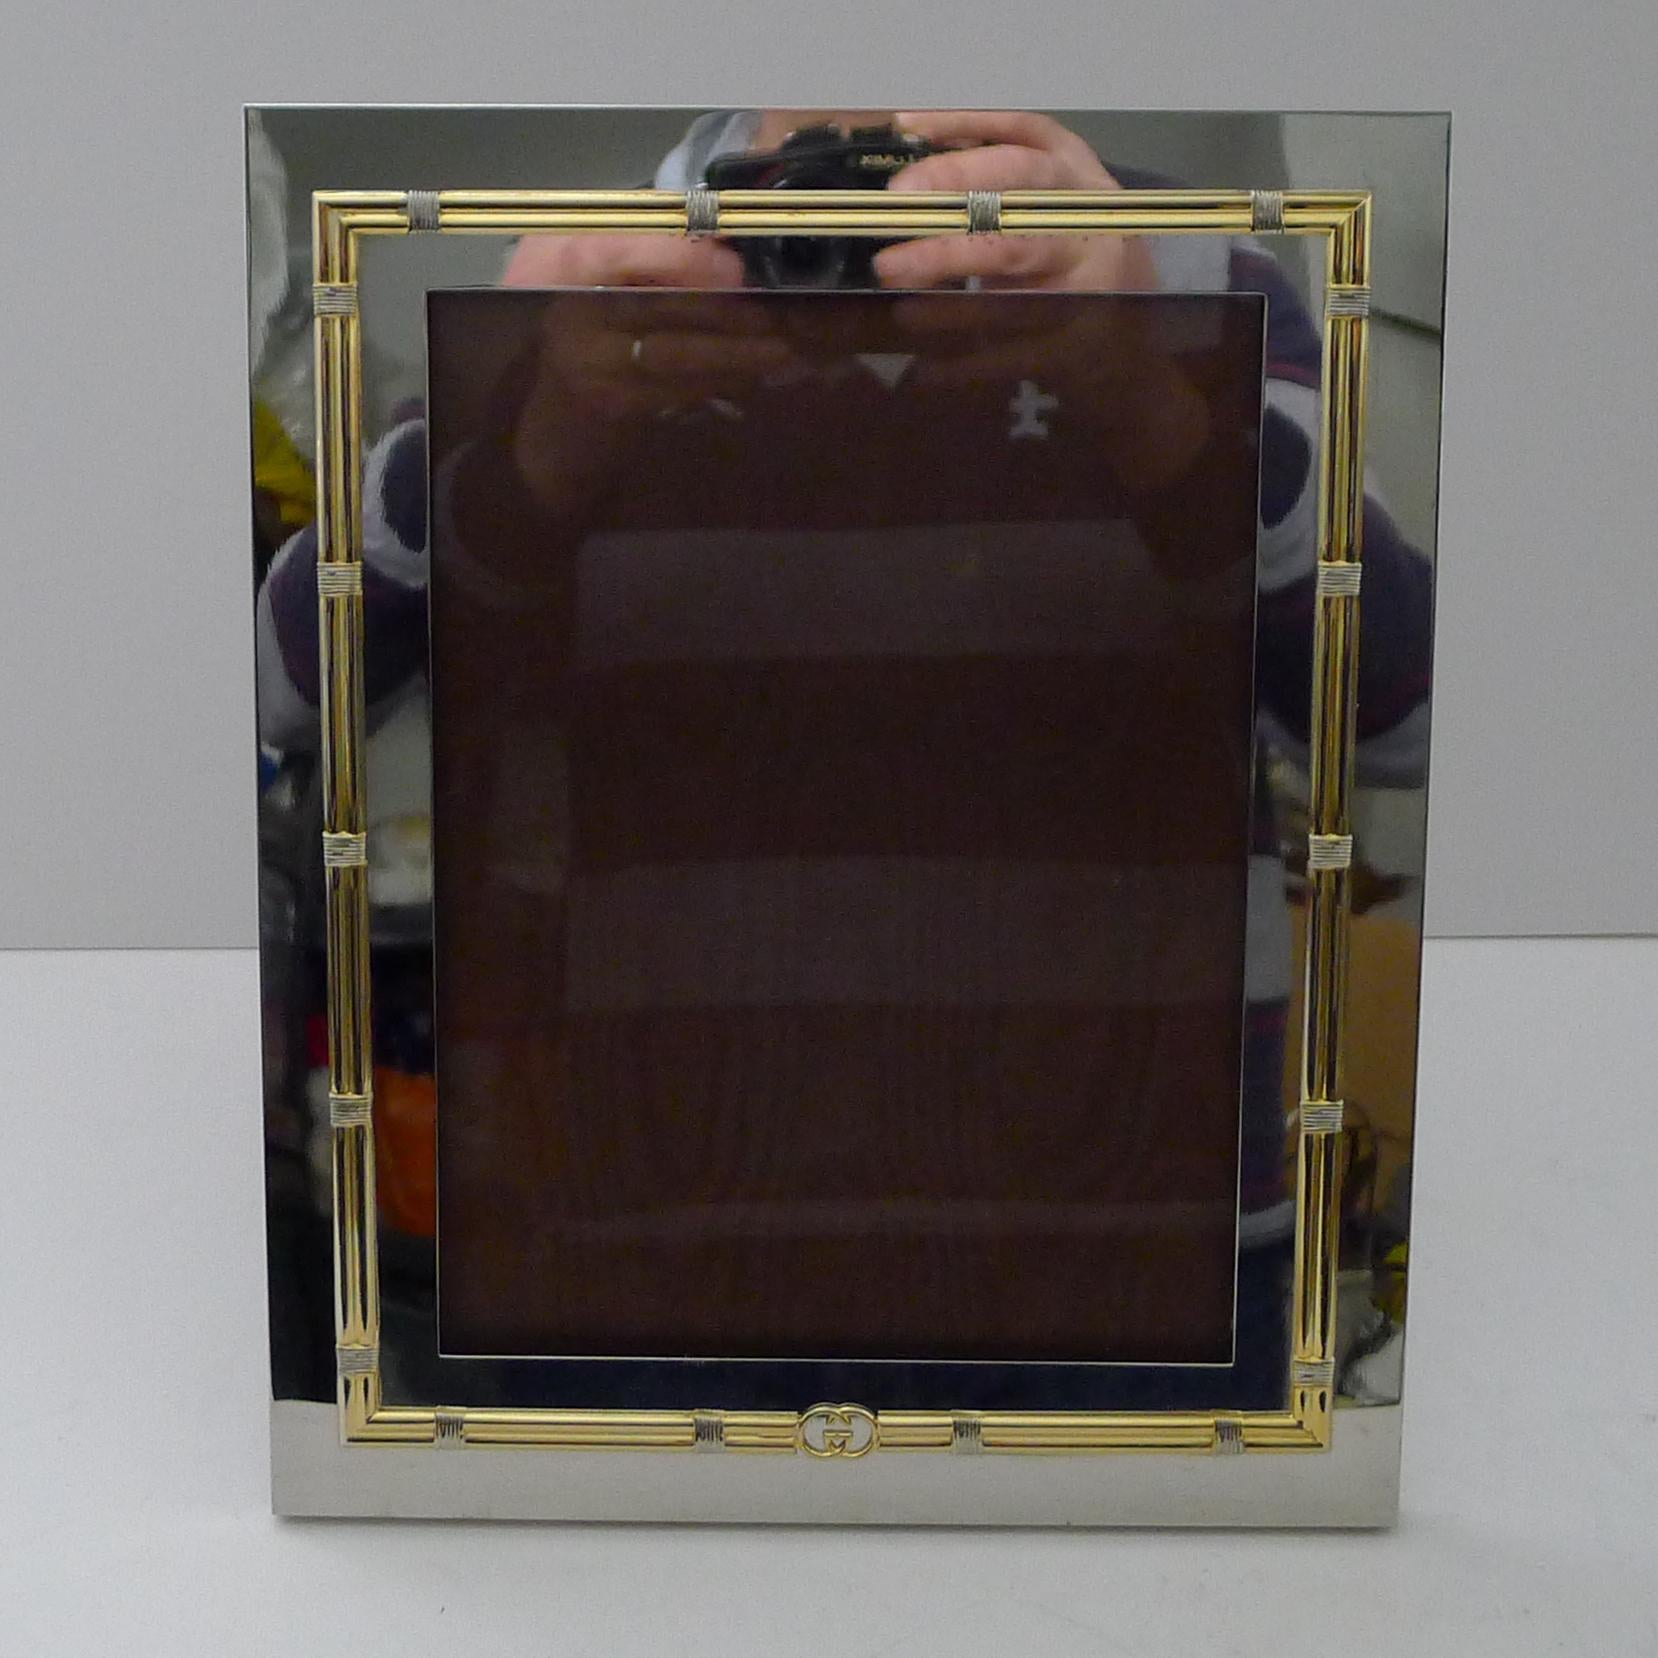 A magnificent sized vintage photograph or picture frame by the famous fashion house, Gucci.

Made from silver plate and lavishly finished with gold or gilding, the raised decoration incorporates the highly coveted GG logo.  The frame is also signed